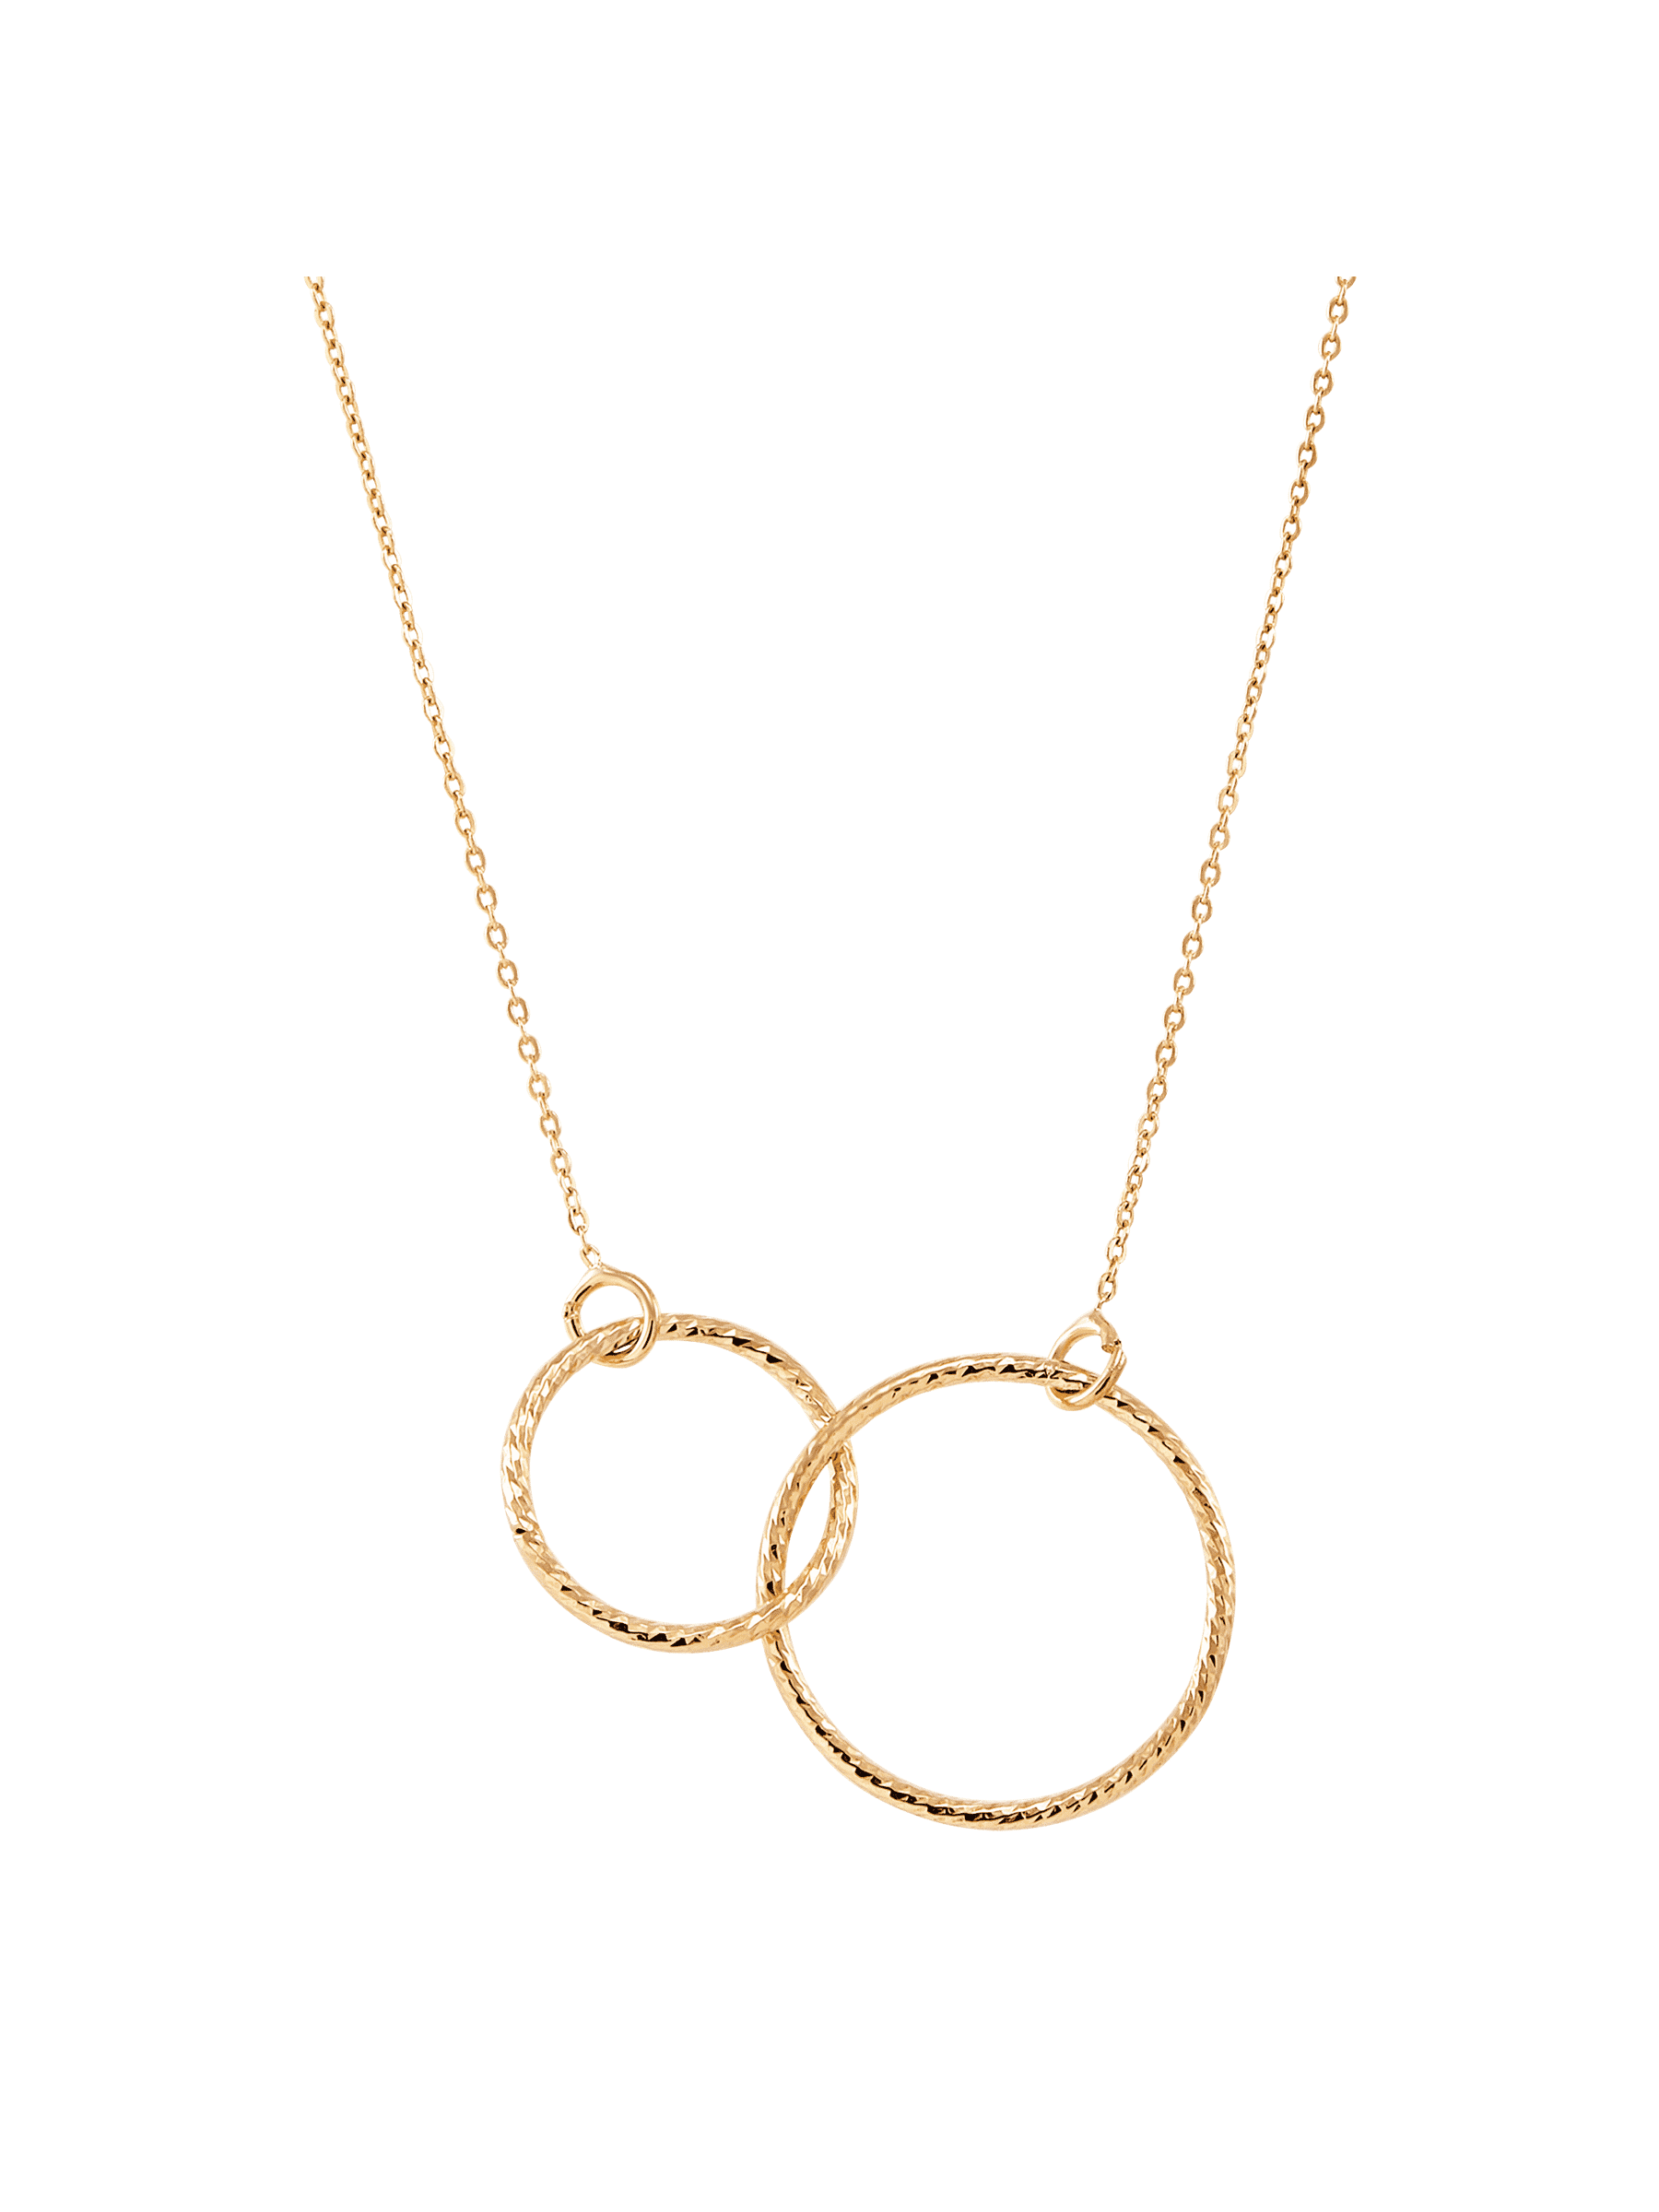 Loulerie Interlinking Circle Necklace | Loulerie